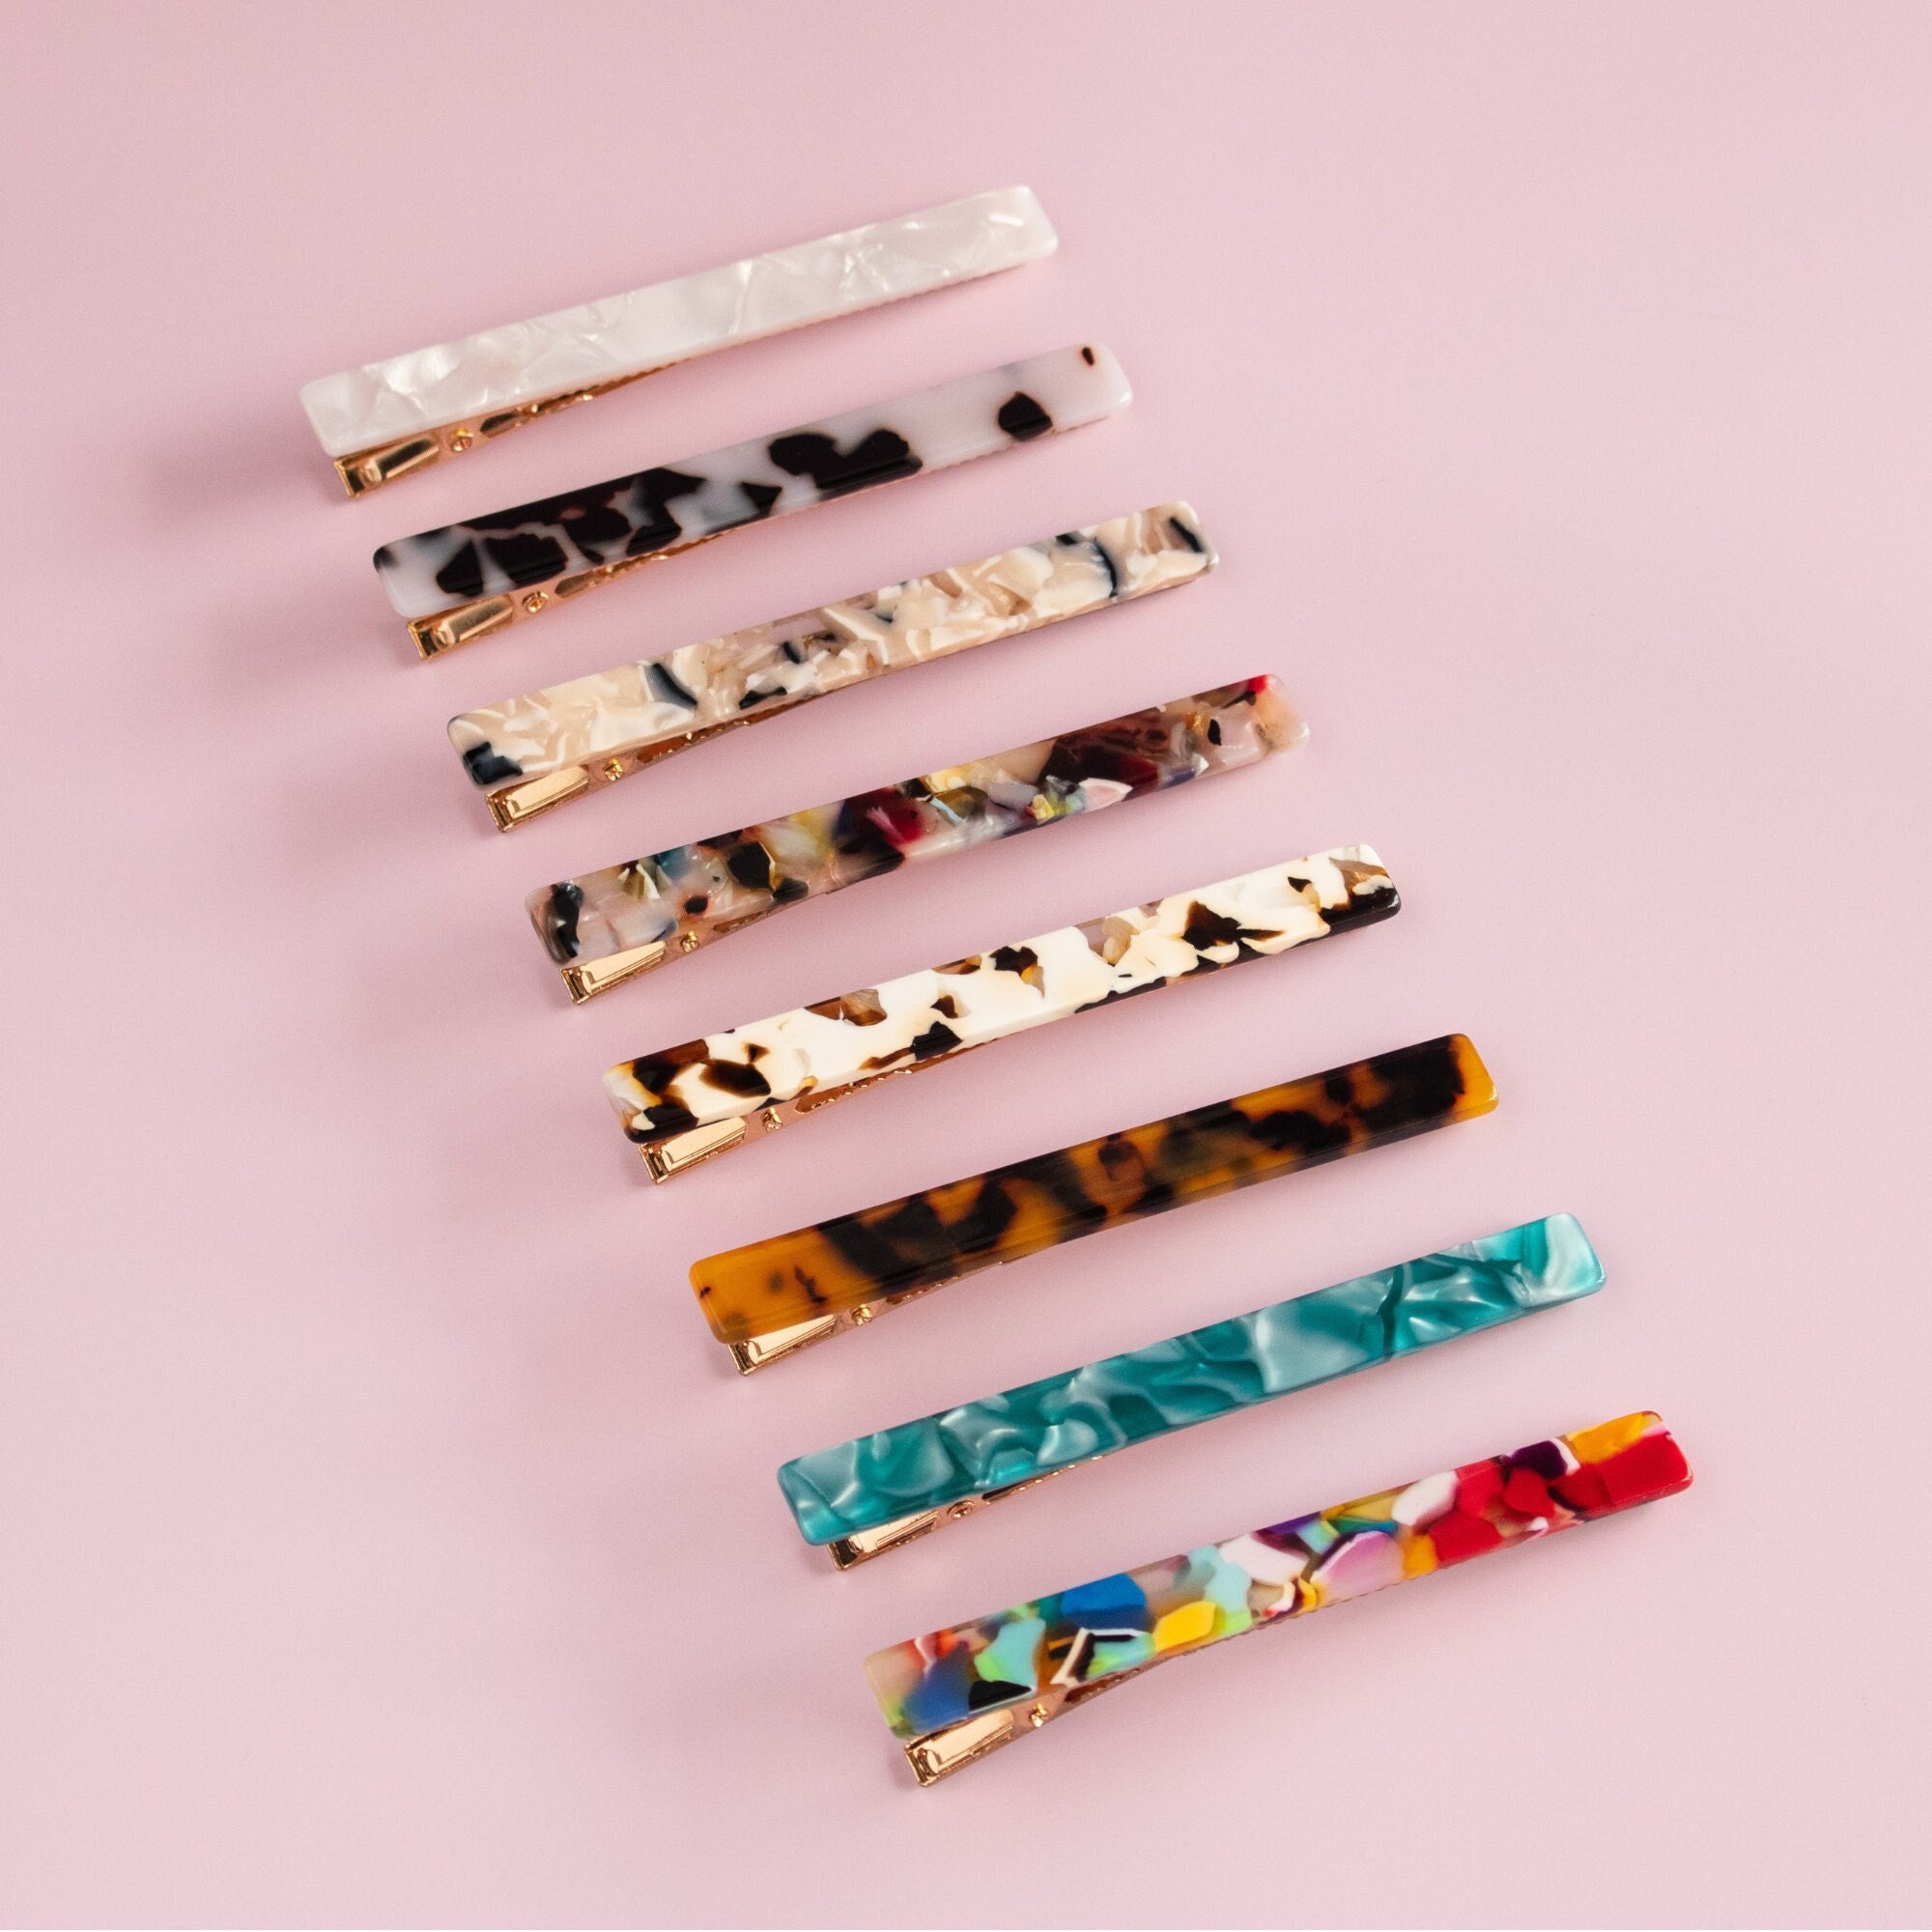 1.57 inch Small Acrylic Hair Claw Clips for Girls and Women Marbling Hair  Clips,Plastic No-Slip Grip Jaw Hair Clip Hair Jaw Clamp,Pack of 12